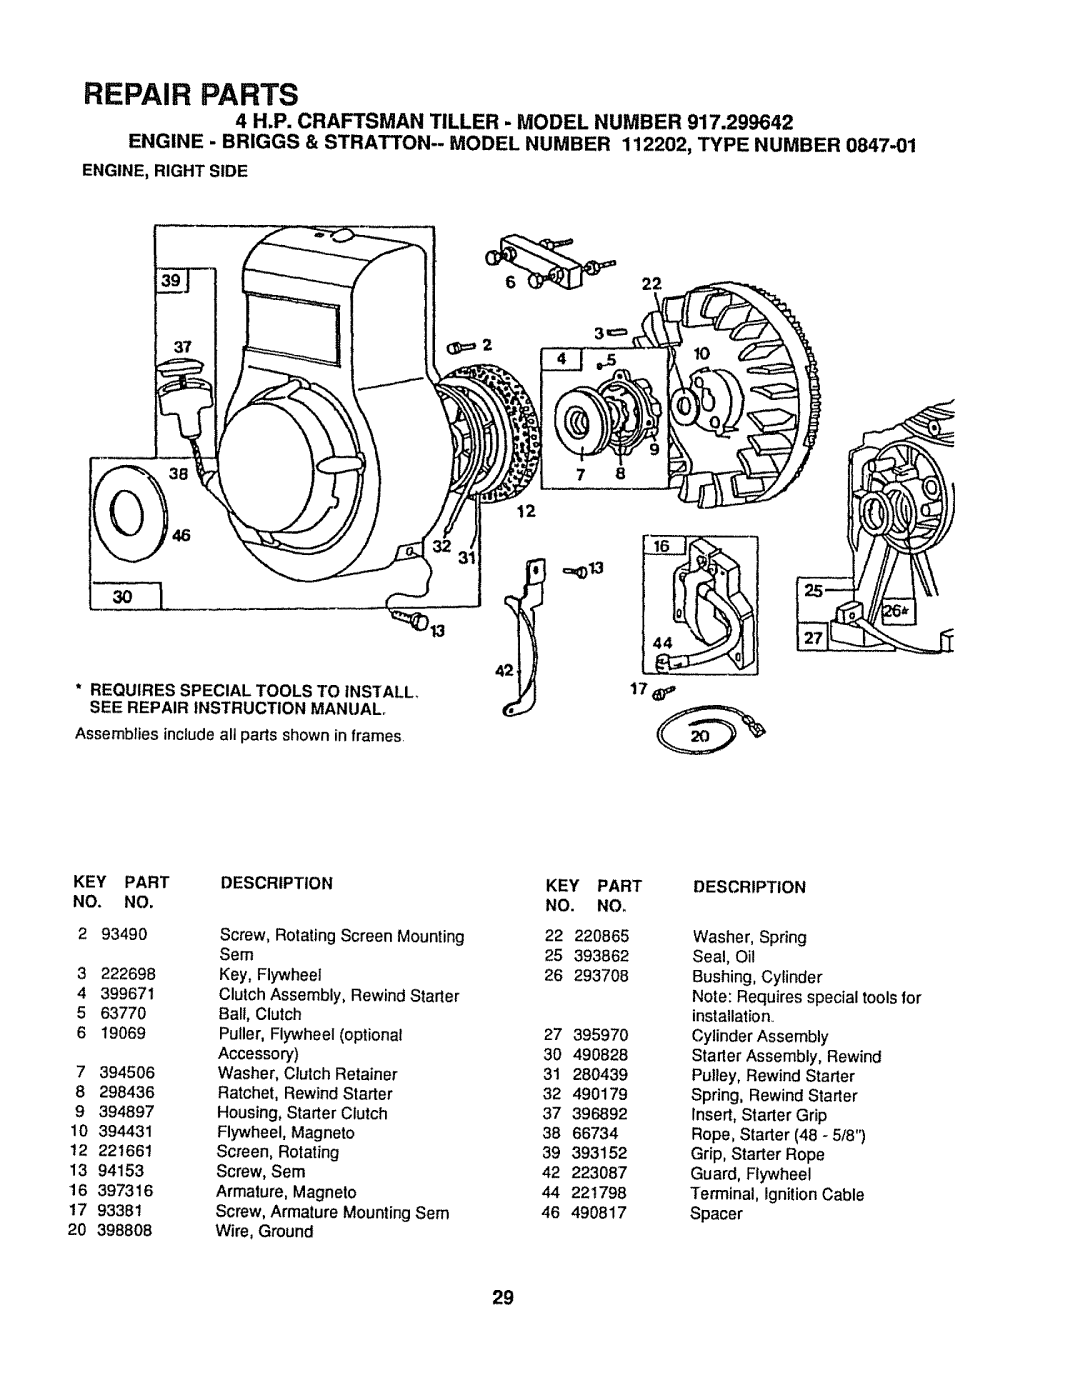 Sears 917.299642 owner manual Ball, Clutch Installation, 94153, 223087 